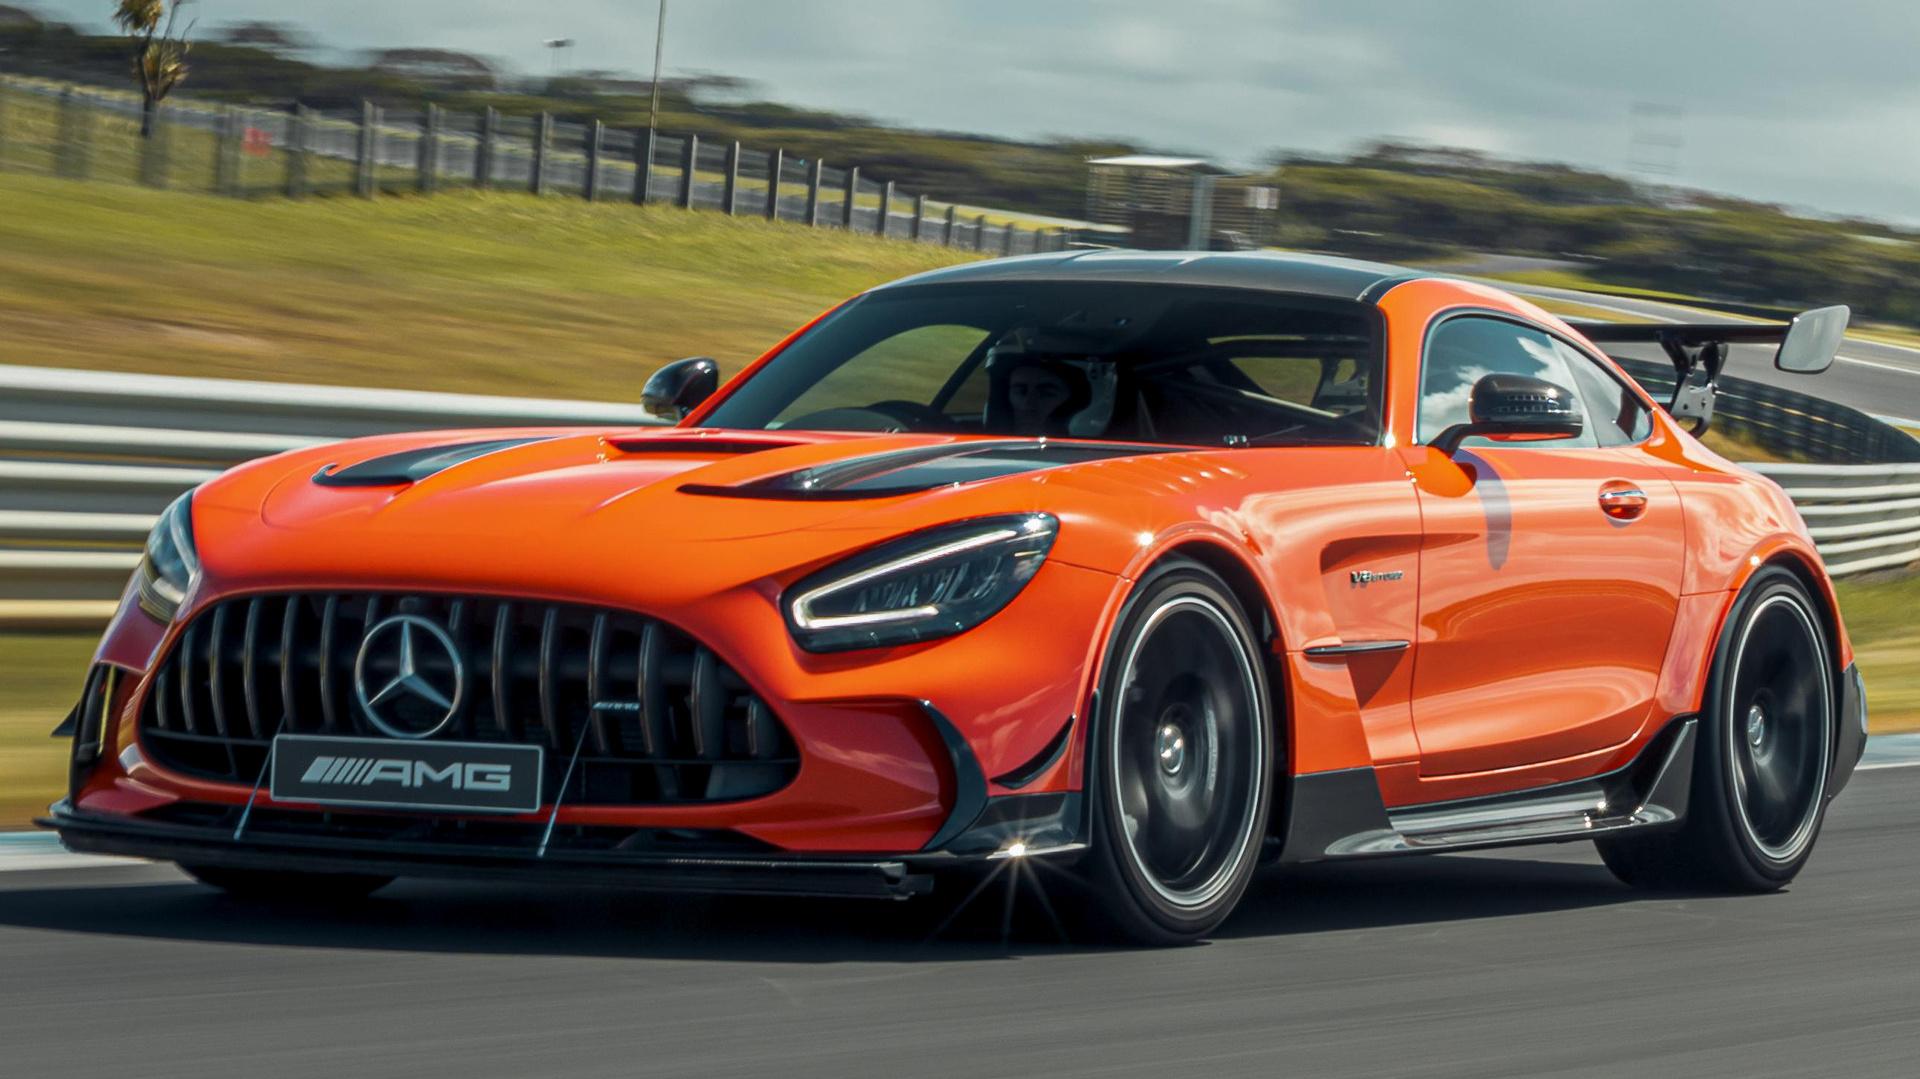 Mercedes Amg Gt Black Series Au Wallpaper And HD Image